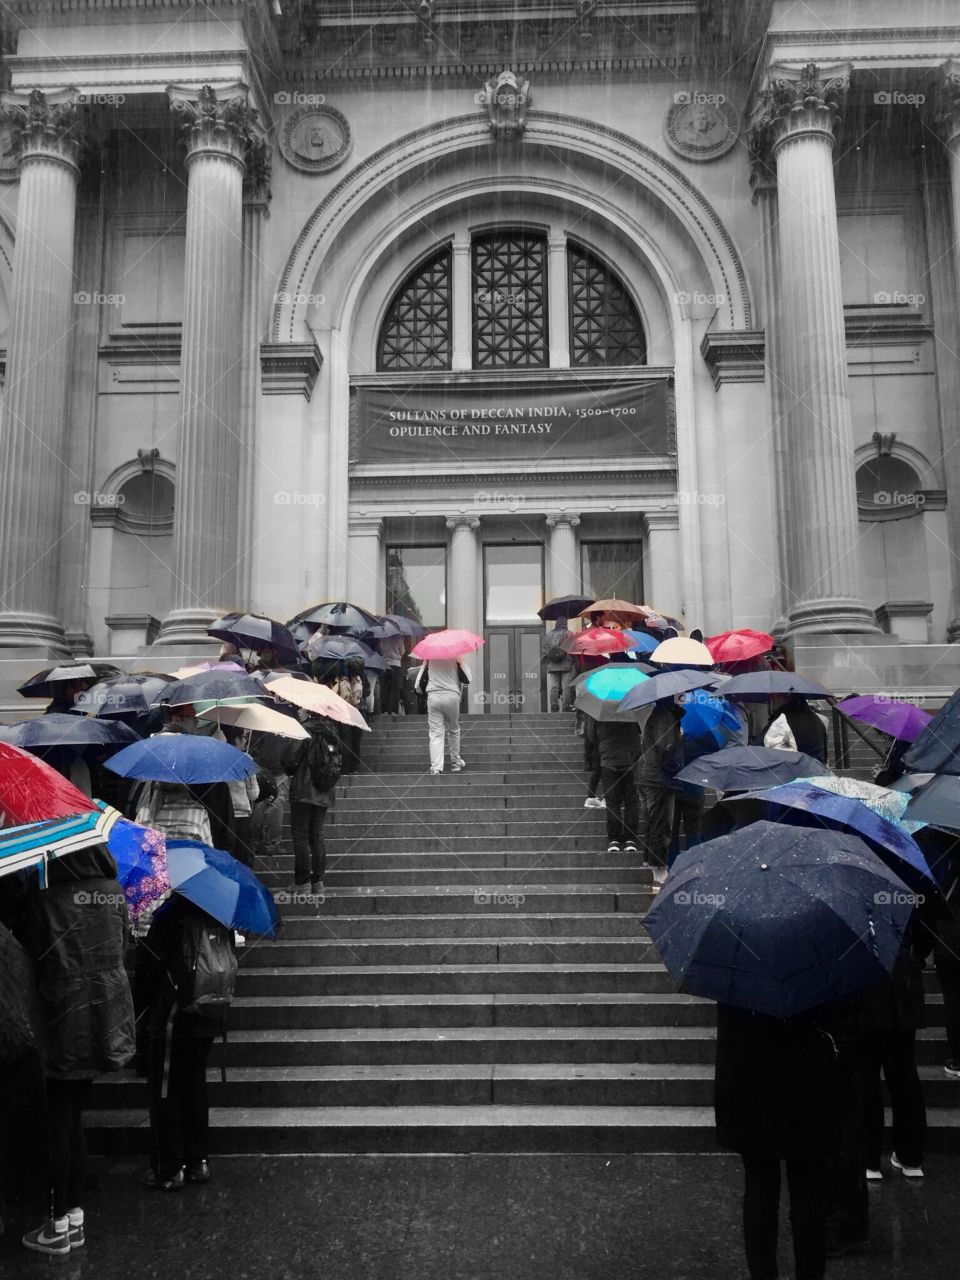 Rainy Day at the MET. Queue at the MET Museum in NYC